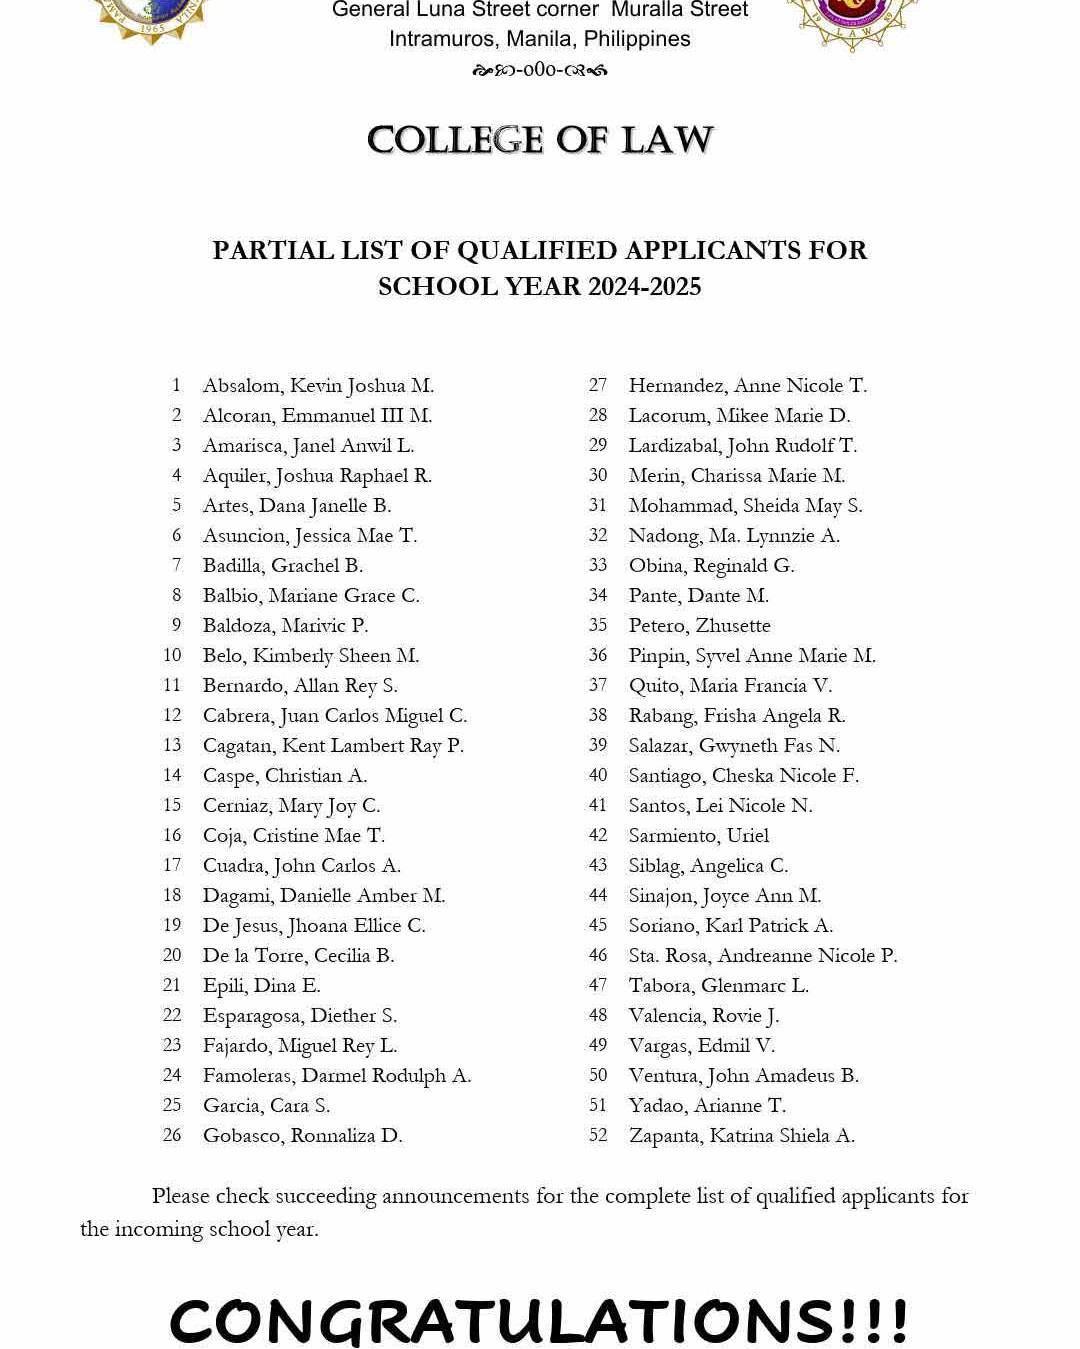 Partial list of qualified applicants at the College of Law for School Year 2024-2025